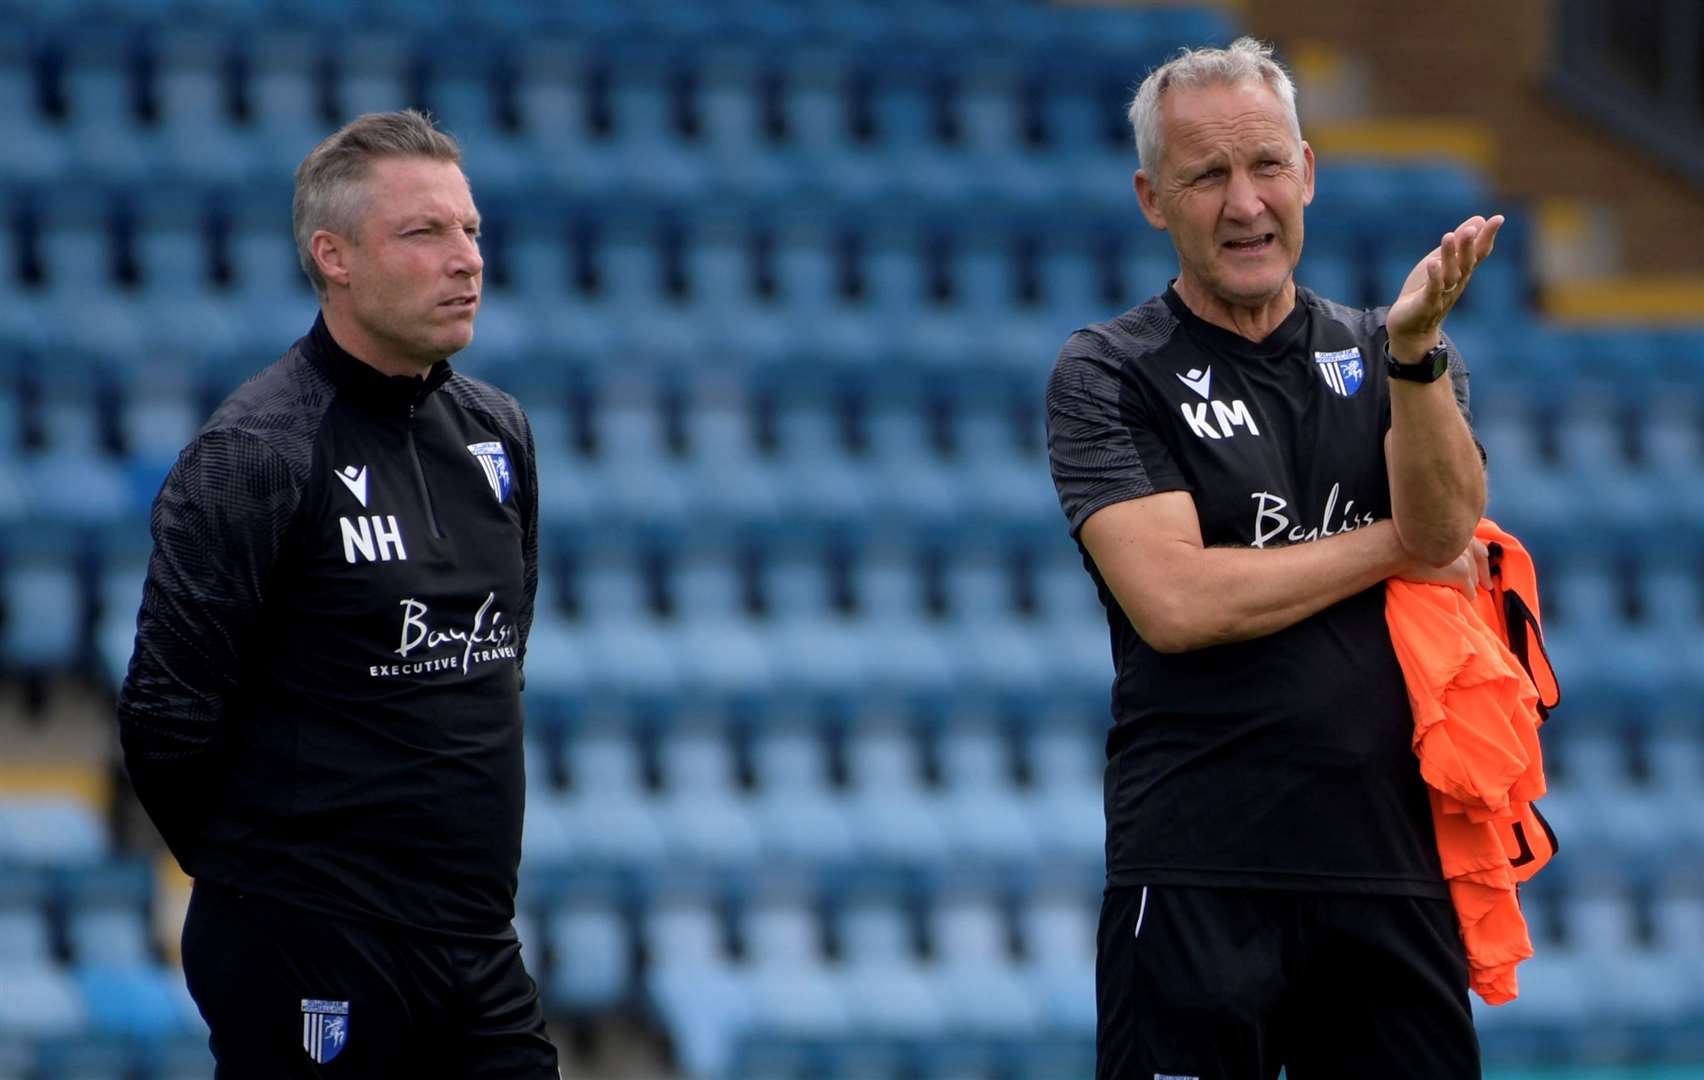 Gillingham v Mk Dons preview | Interim manager Keith Millen looks ahead to  League 2 match at Priestfield